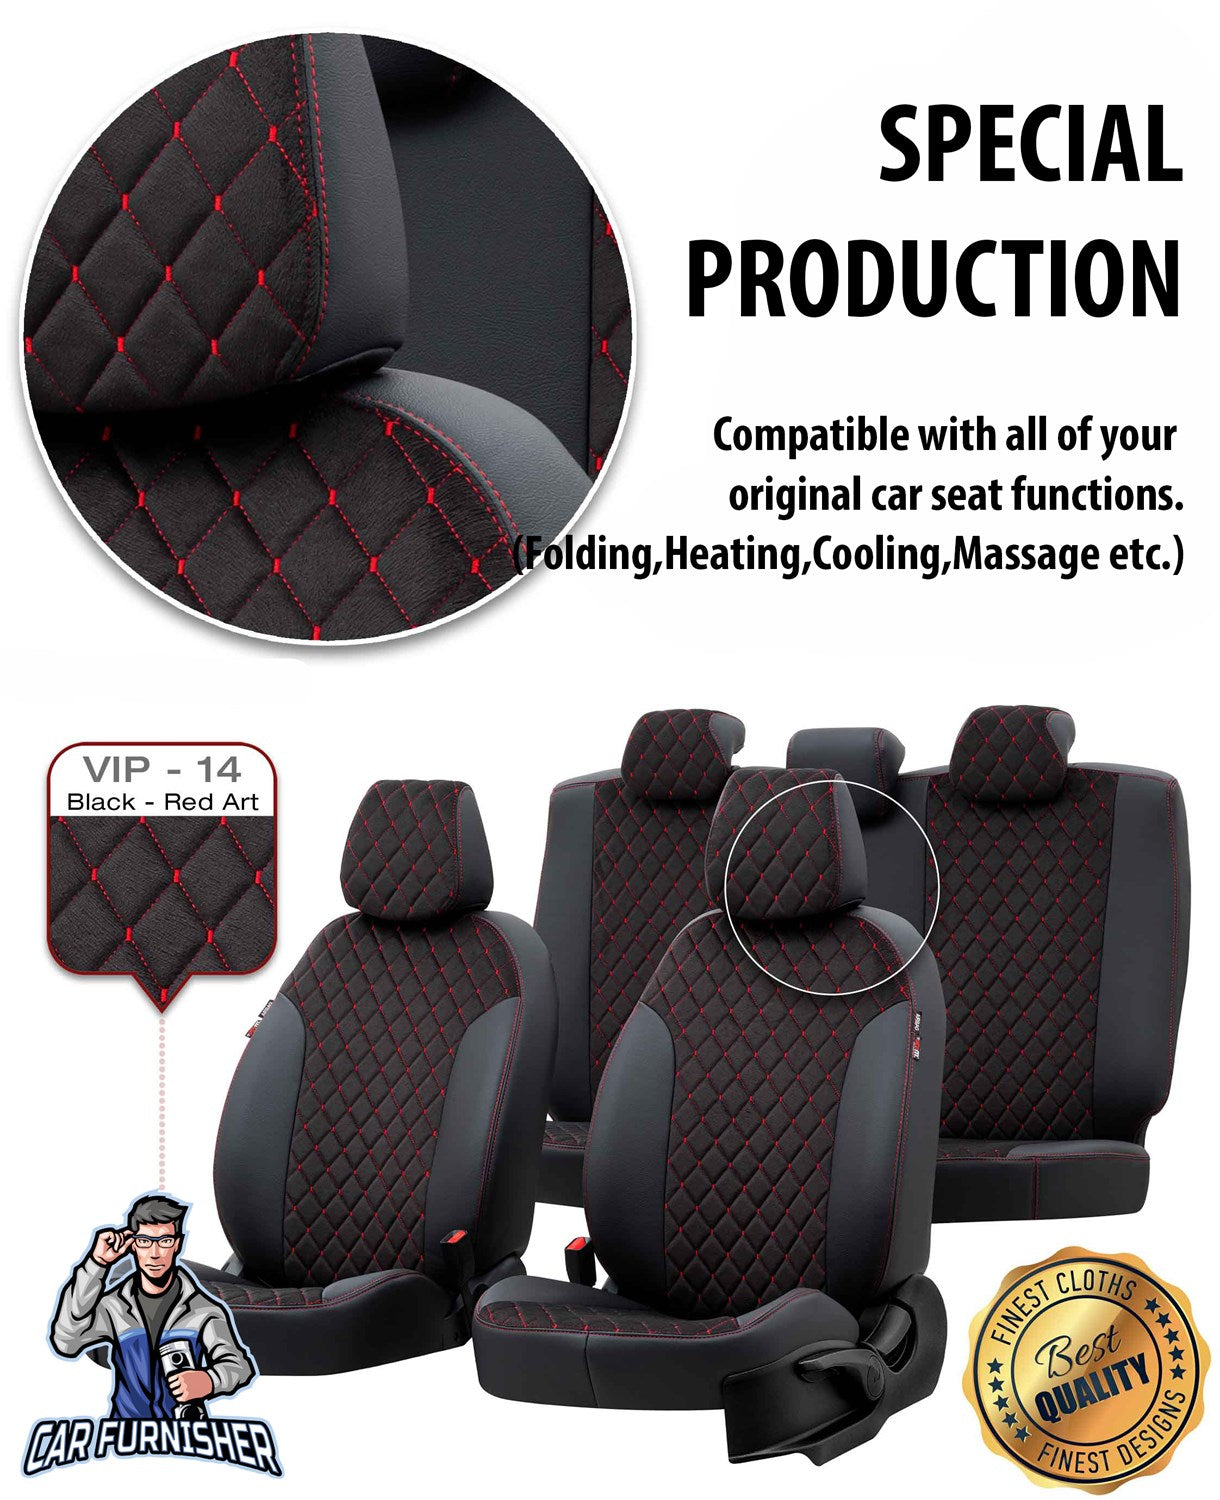 Citroen C2 Car Seat Covers 2004-2008 Madrid Foal Feather Dark Red Leather & Foal Feather